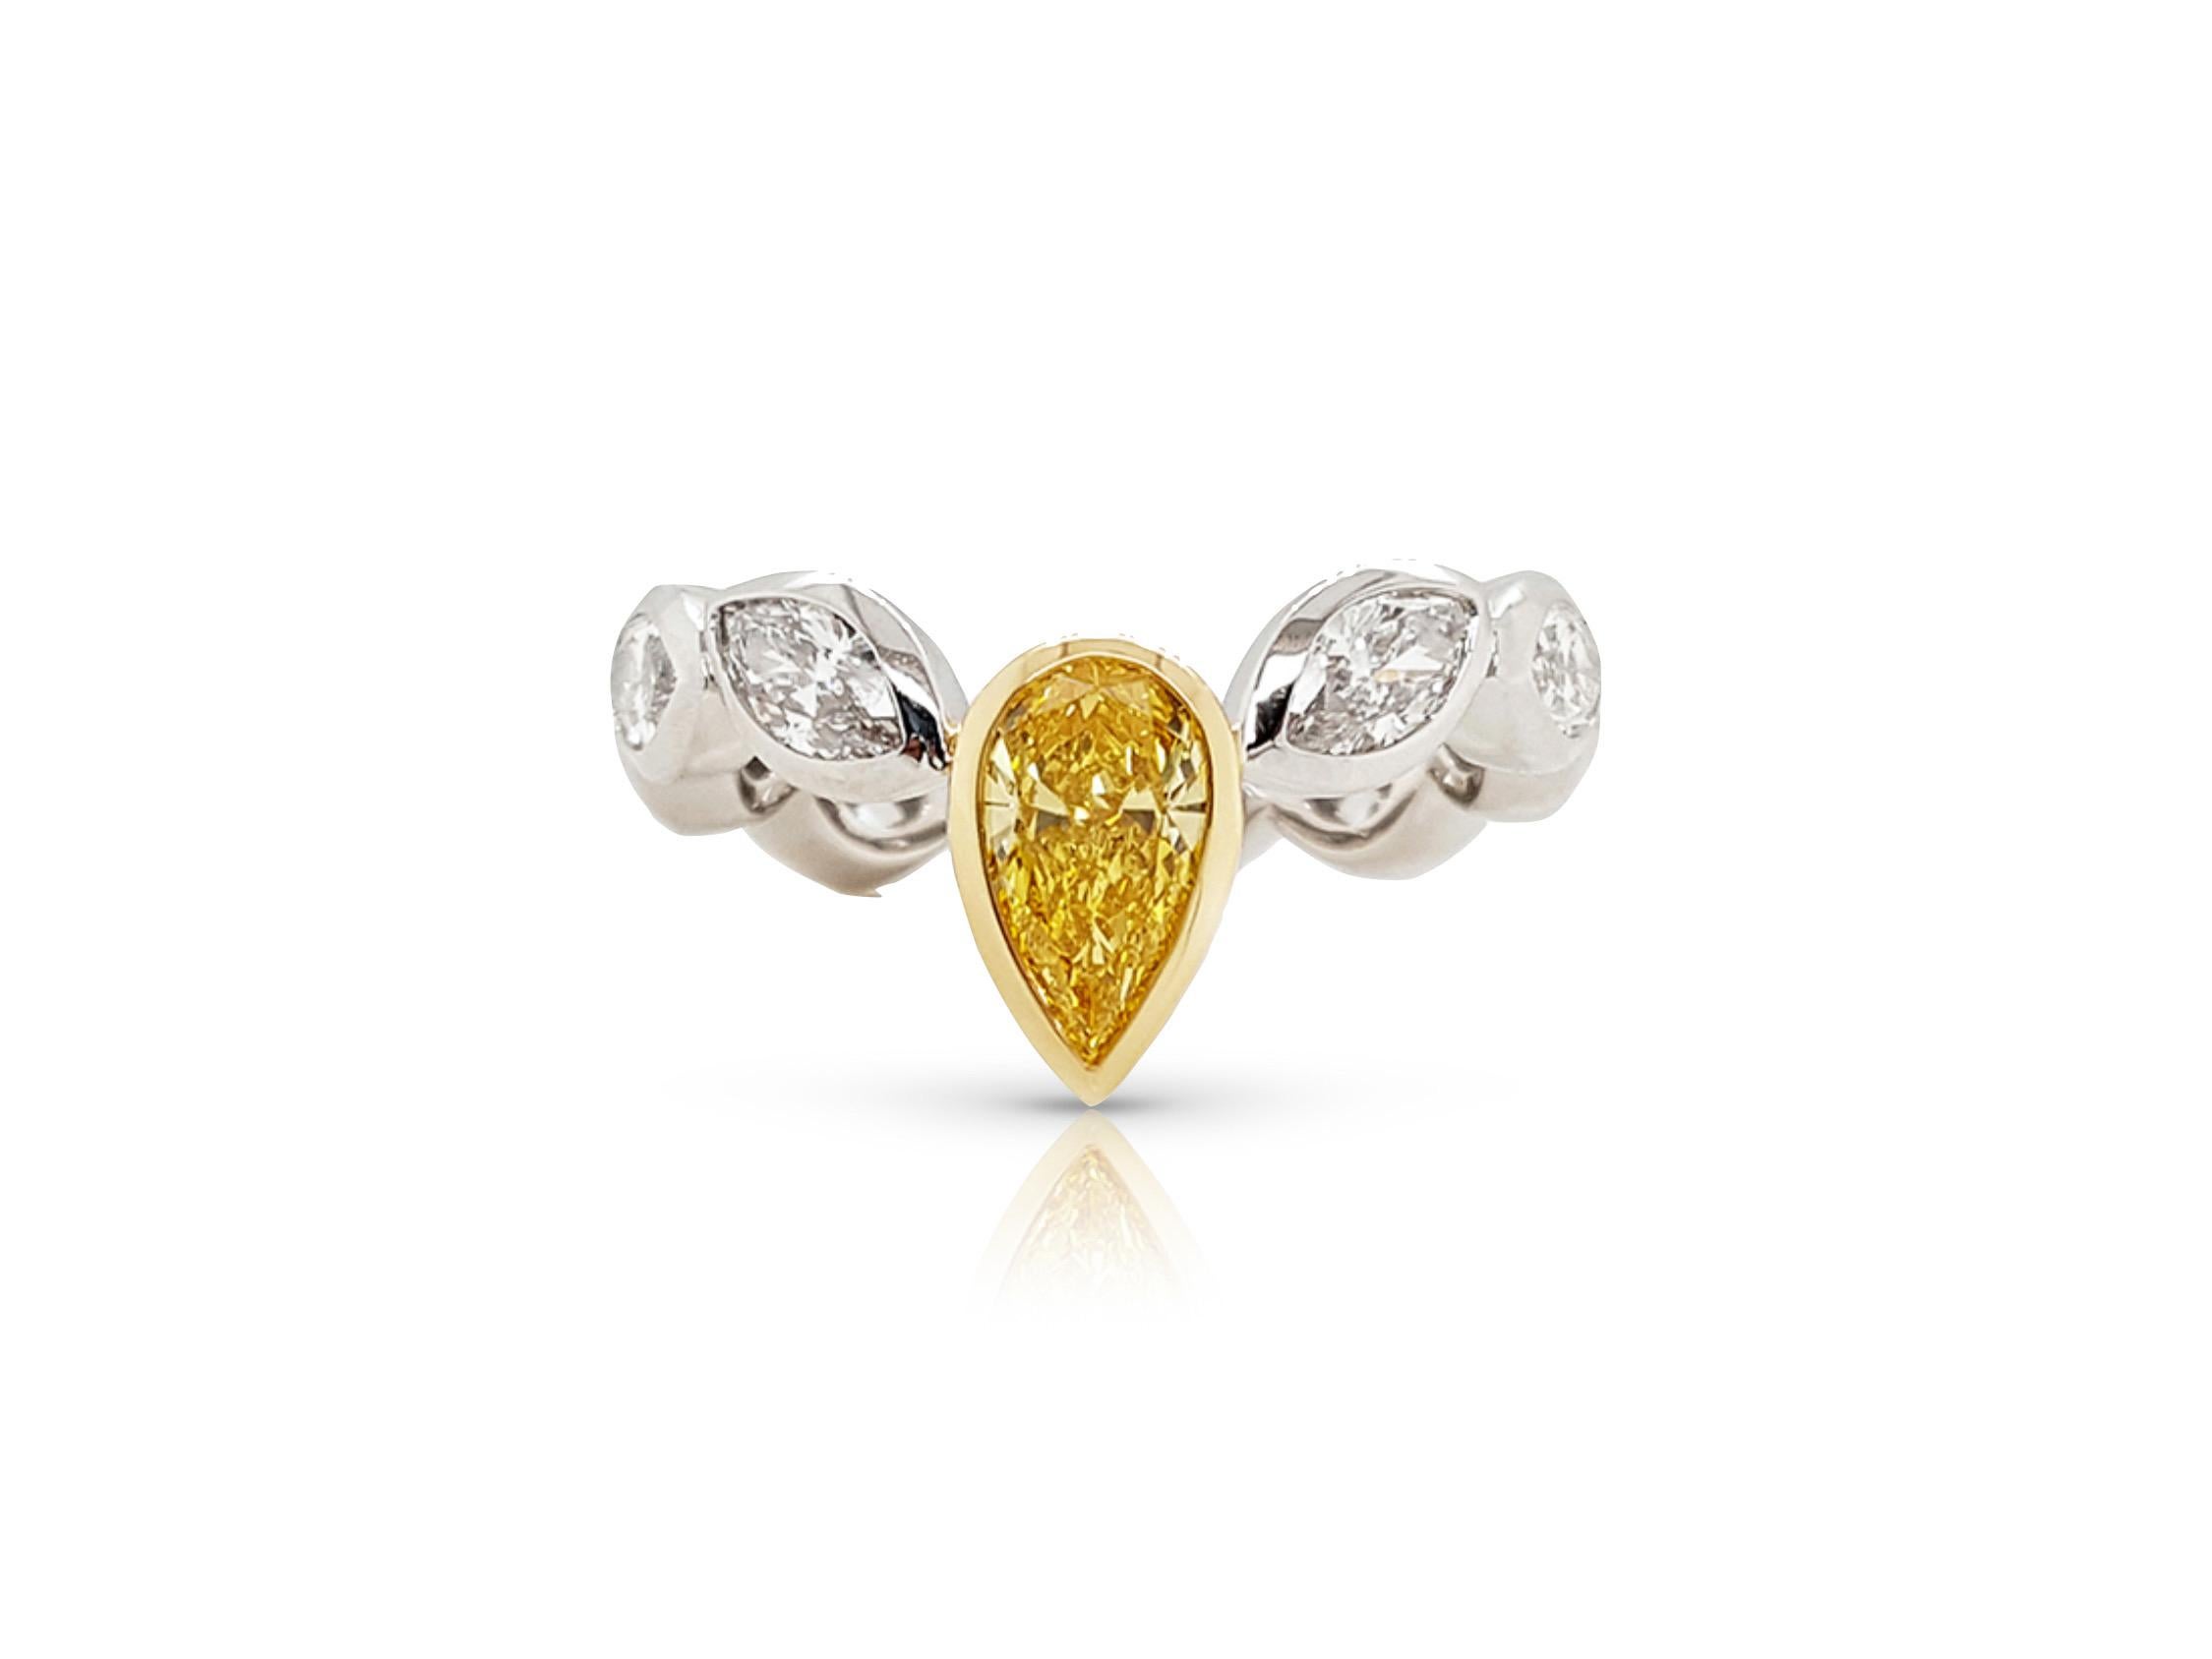 Novel Collection showcasing a unique and elegant engagement ring, 0.71 carat Fancy Vivid Yellow pear shape diamond certified by GIA as VS1 clarity. The center diamond is set in a delicate bezel setting giving it a unique and contemporary look.